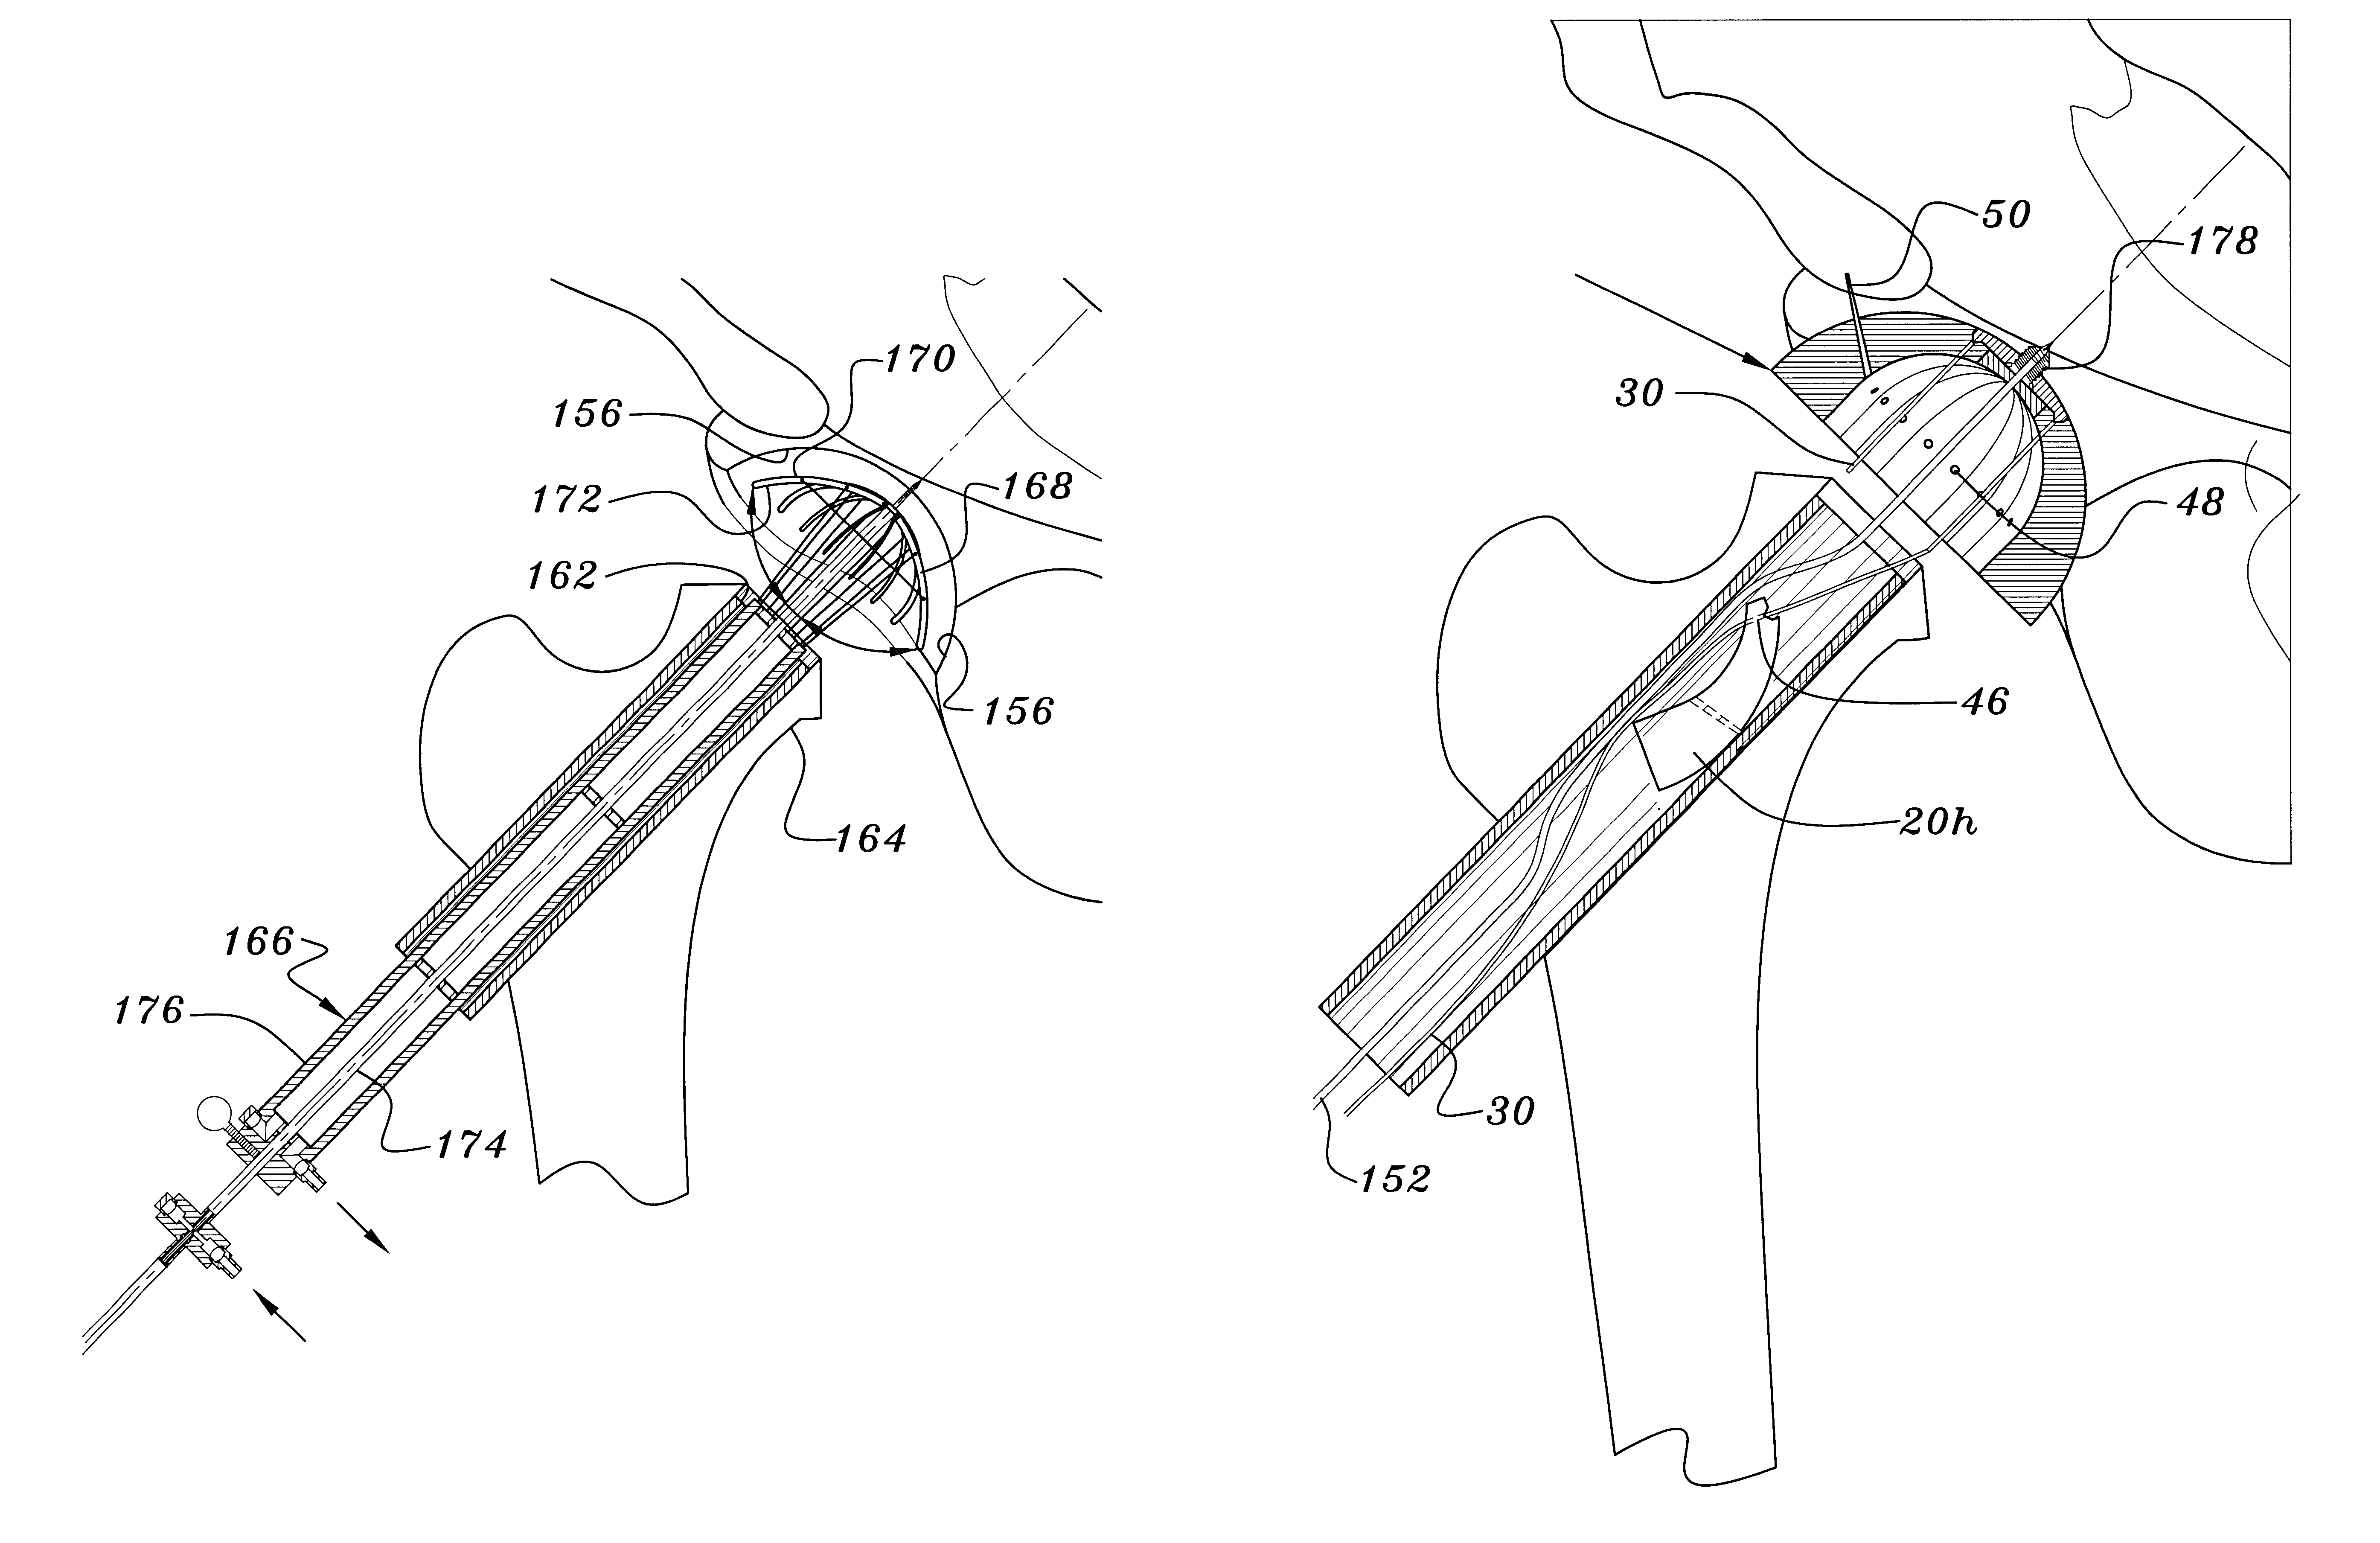 Joint prosthesis and method for placement